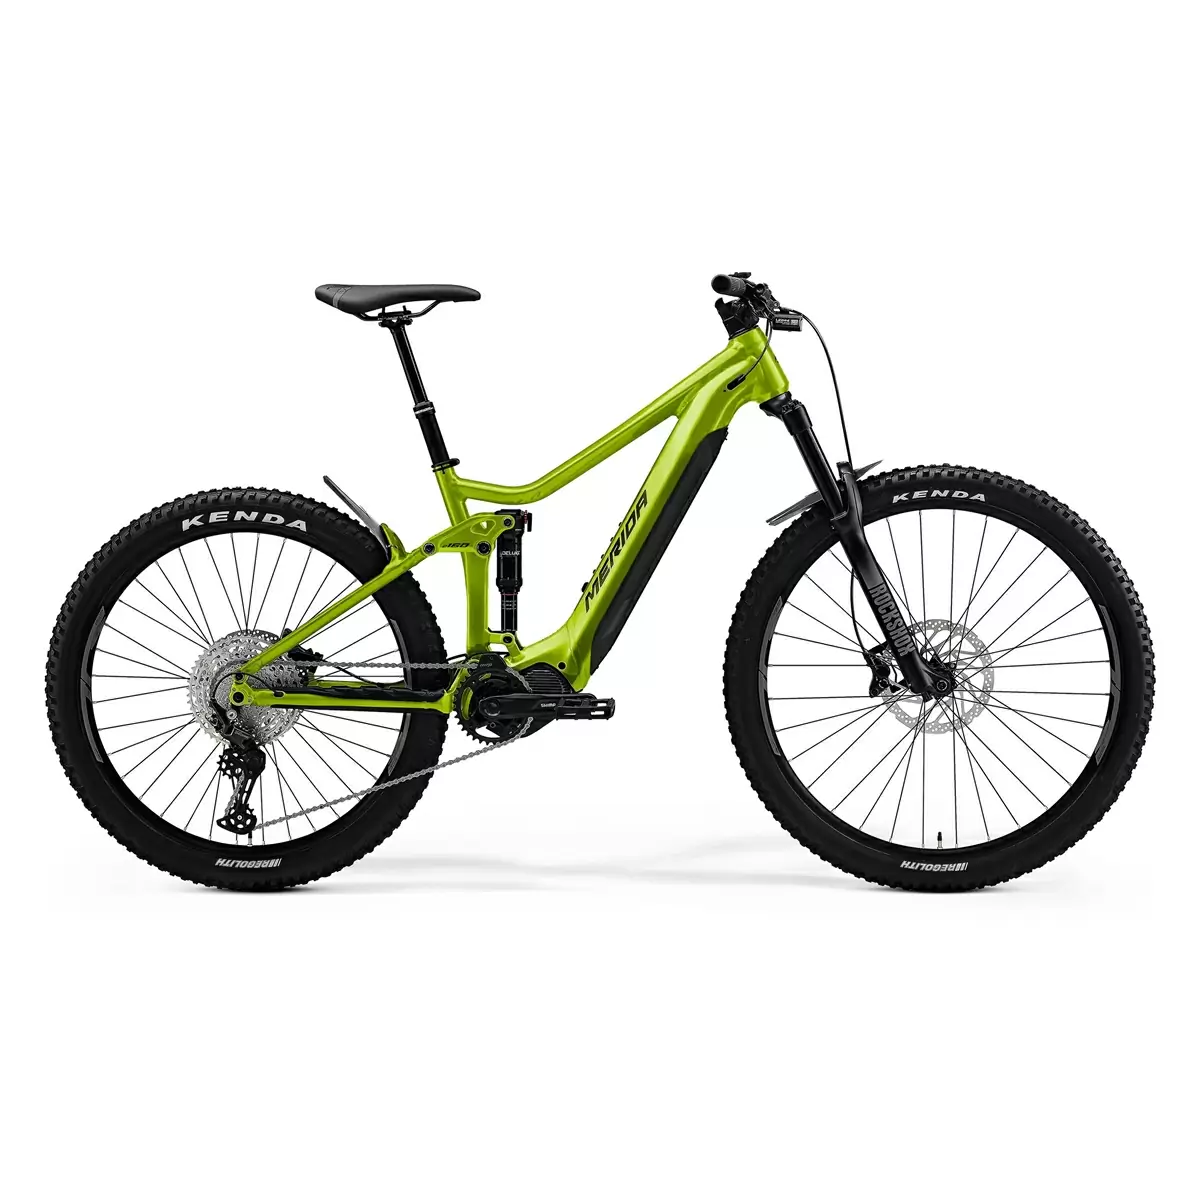 eONE-SIXTY 575 29/27.5'' 160mm 11s 750Wh Shimano EP8 Green Size S - image